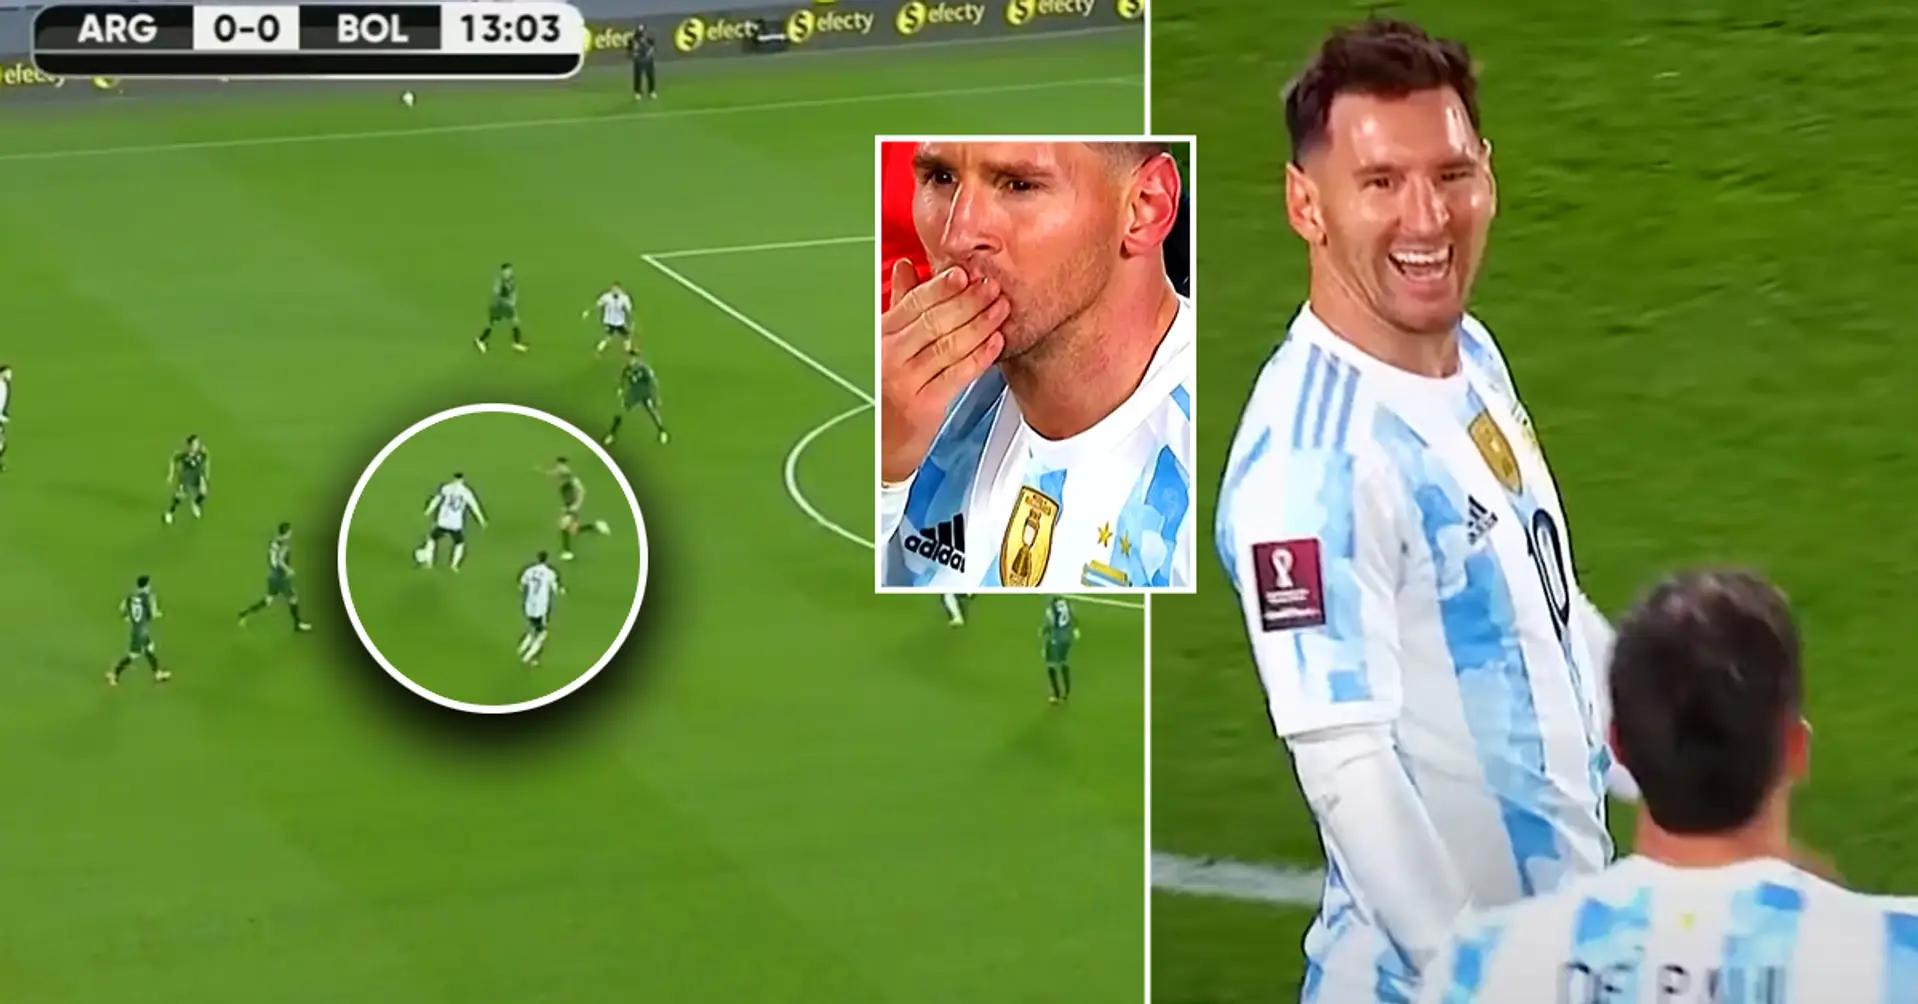 Lionel Messi's insane dribble and goal stunning performance for Argentina (video)